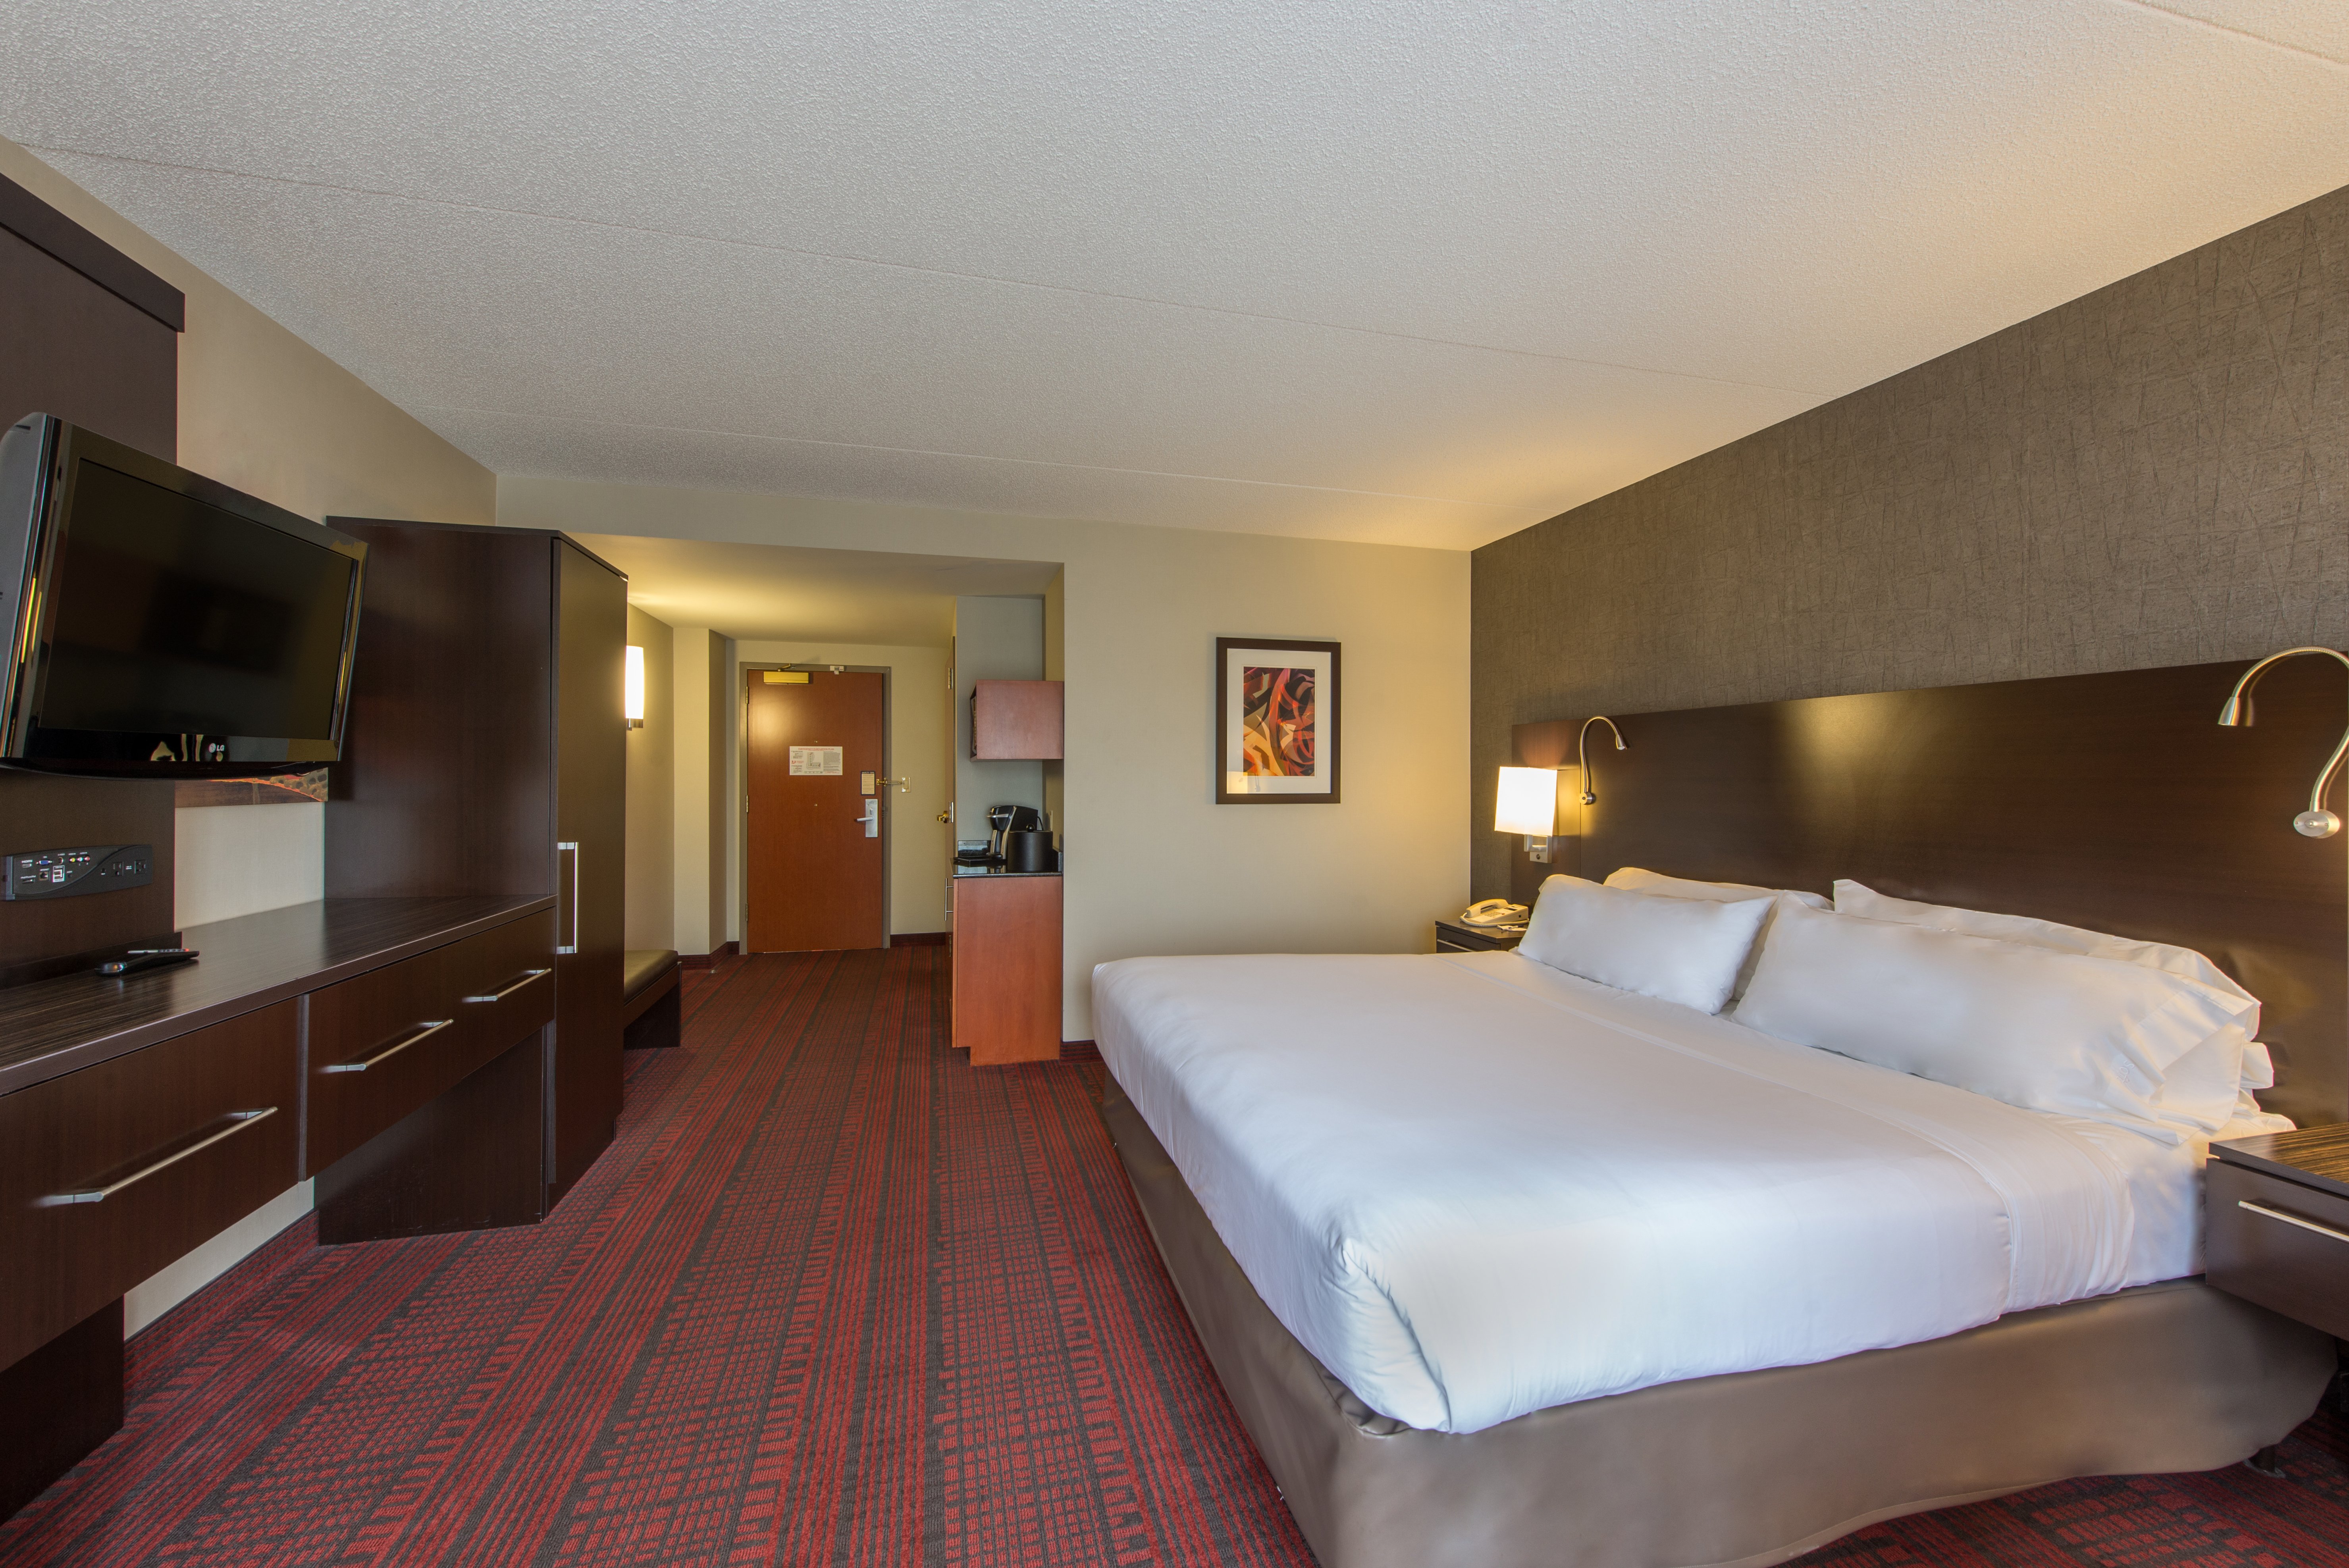 Relax in our guest rooms and catch your favorite TV show.